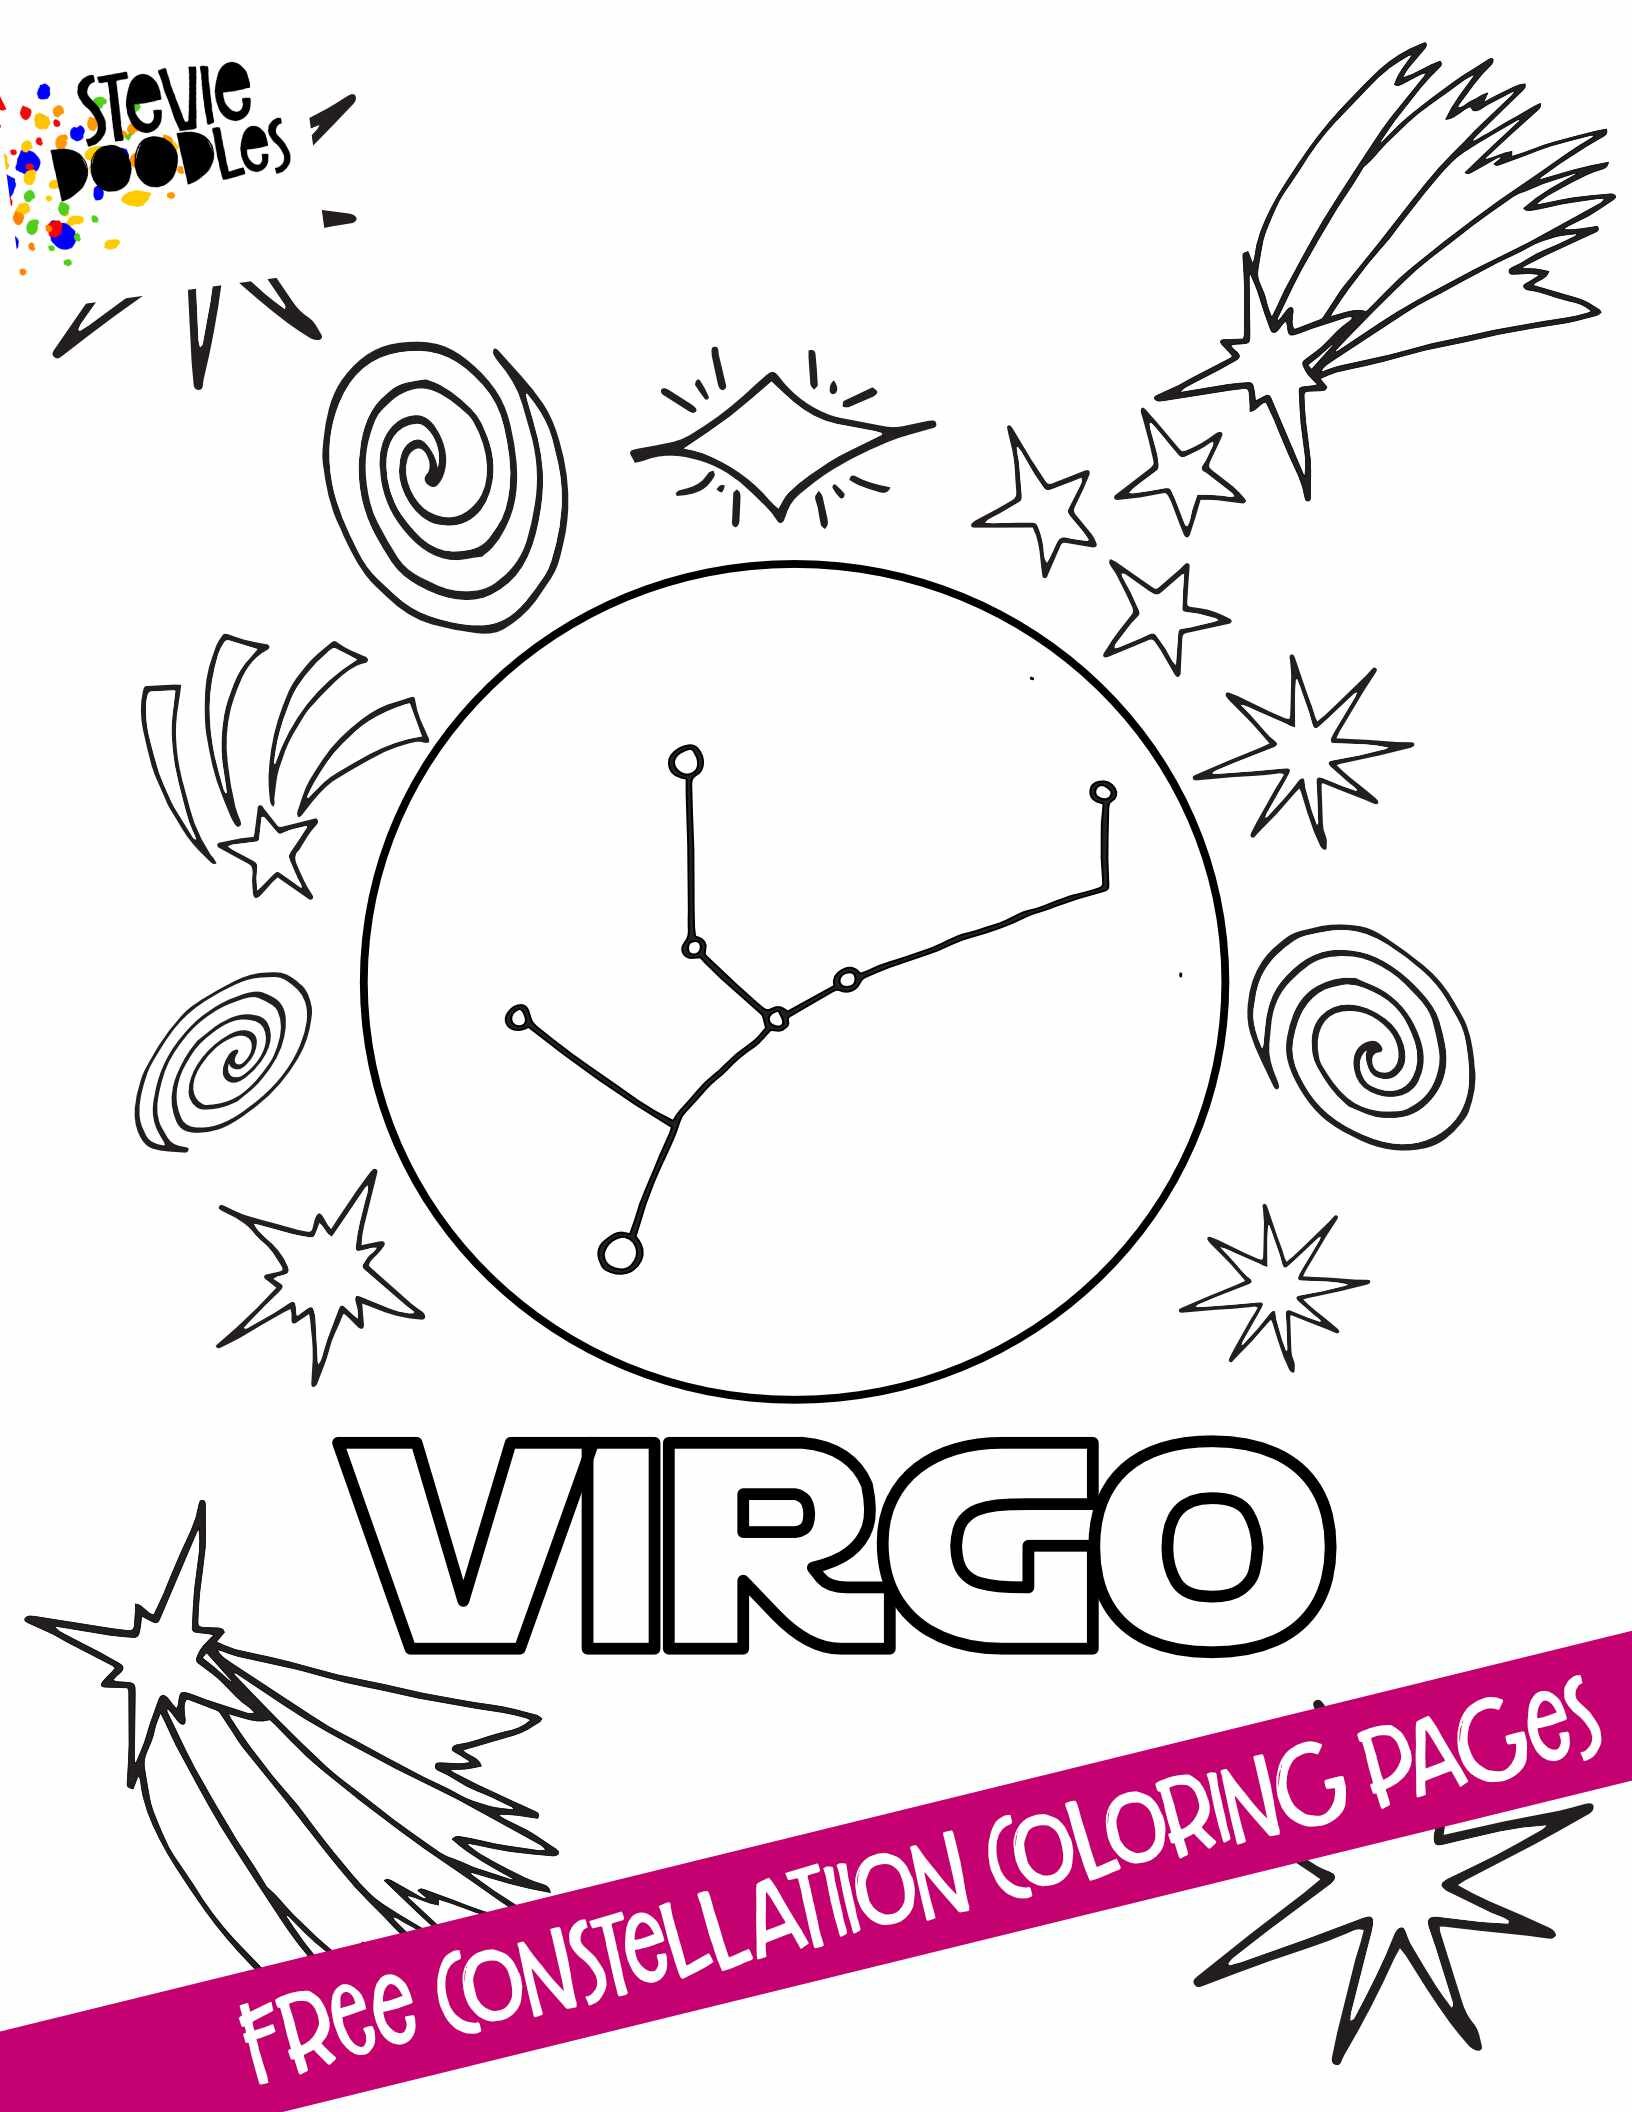 VIRGO - 12 Free Constellation Coloring Pages - Over 1000 Free Coloring Pages CLICK HERE TO PRINT THE PAGE ABOVE